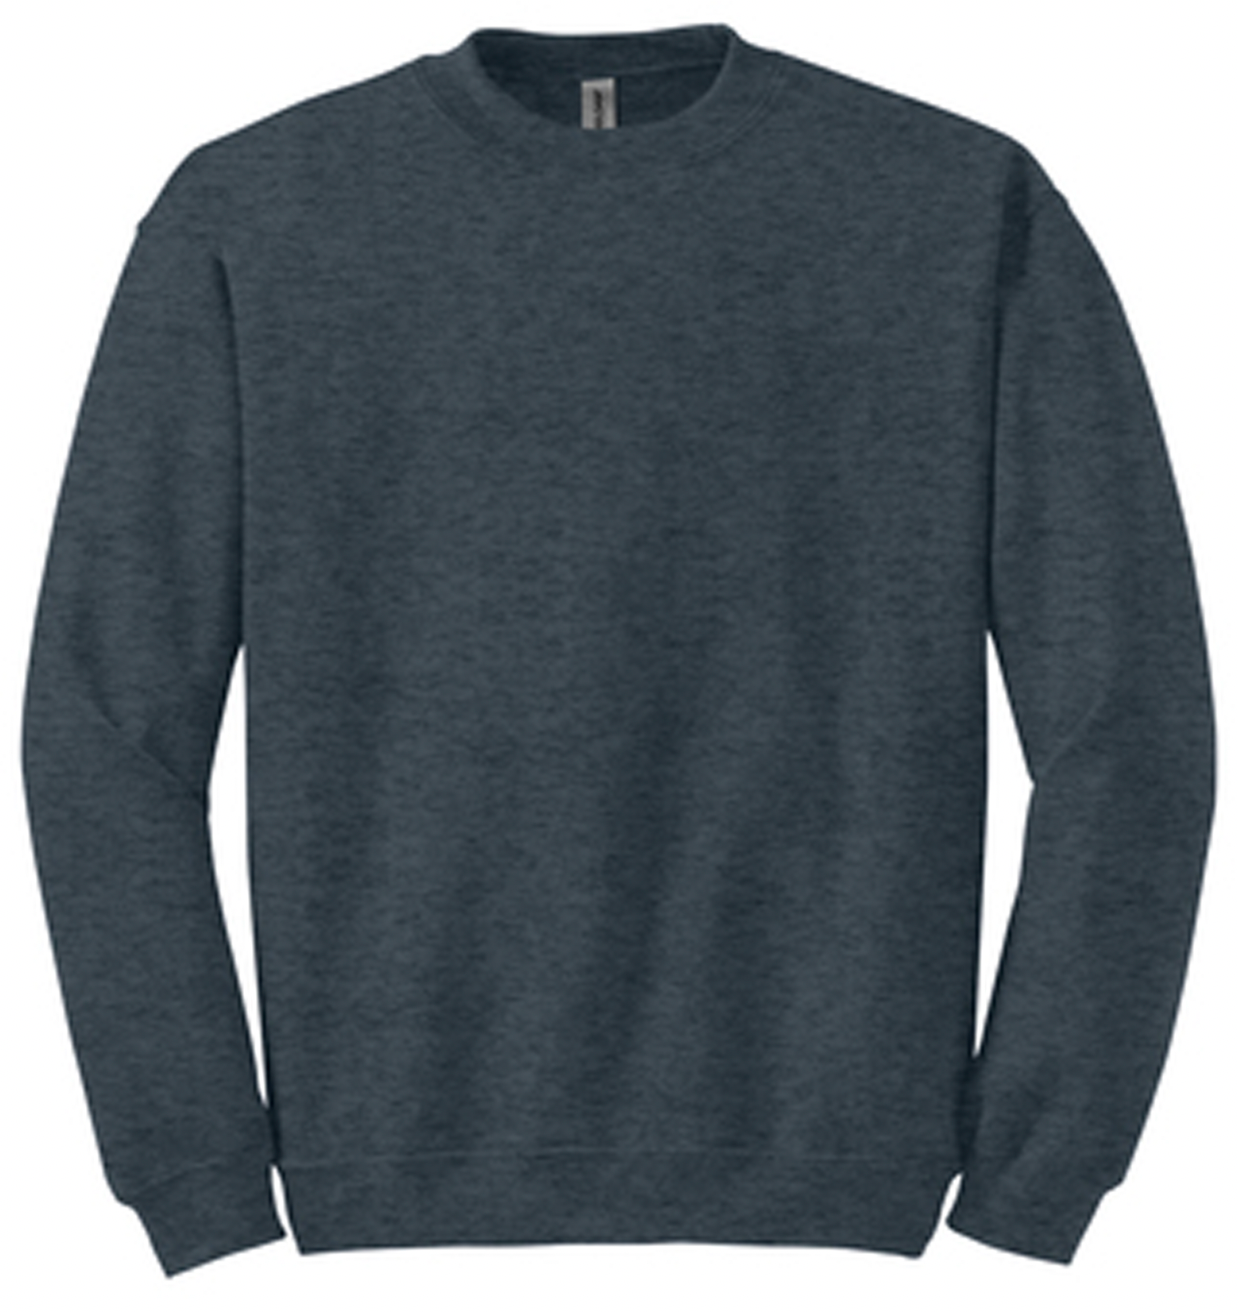 Left Chest Logo - Mary Hill - Integrated Services Crewneck Sweatshirt